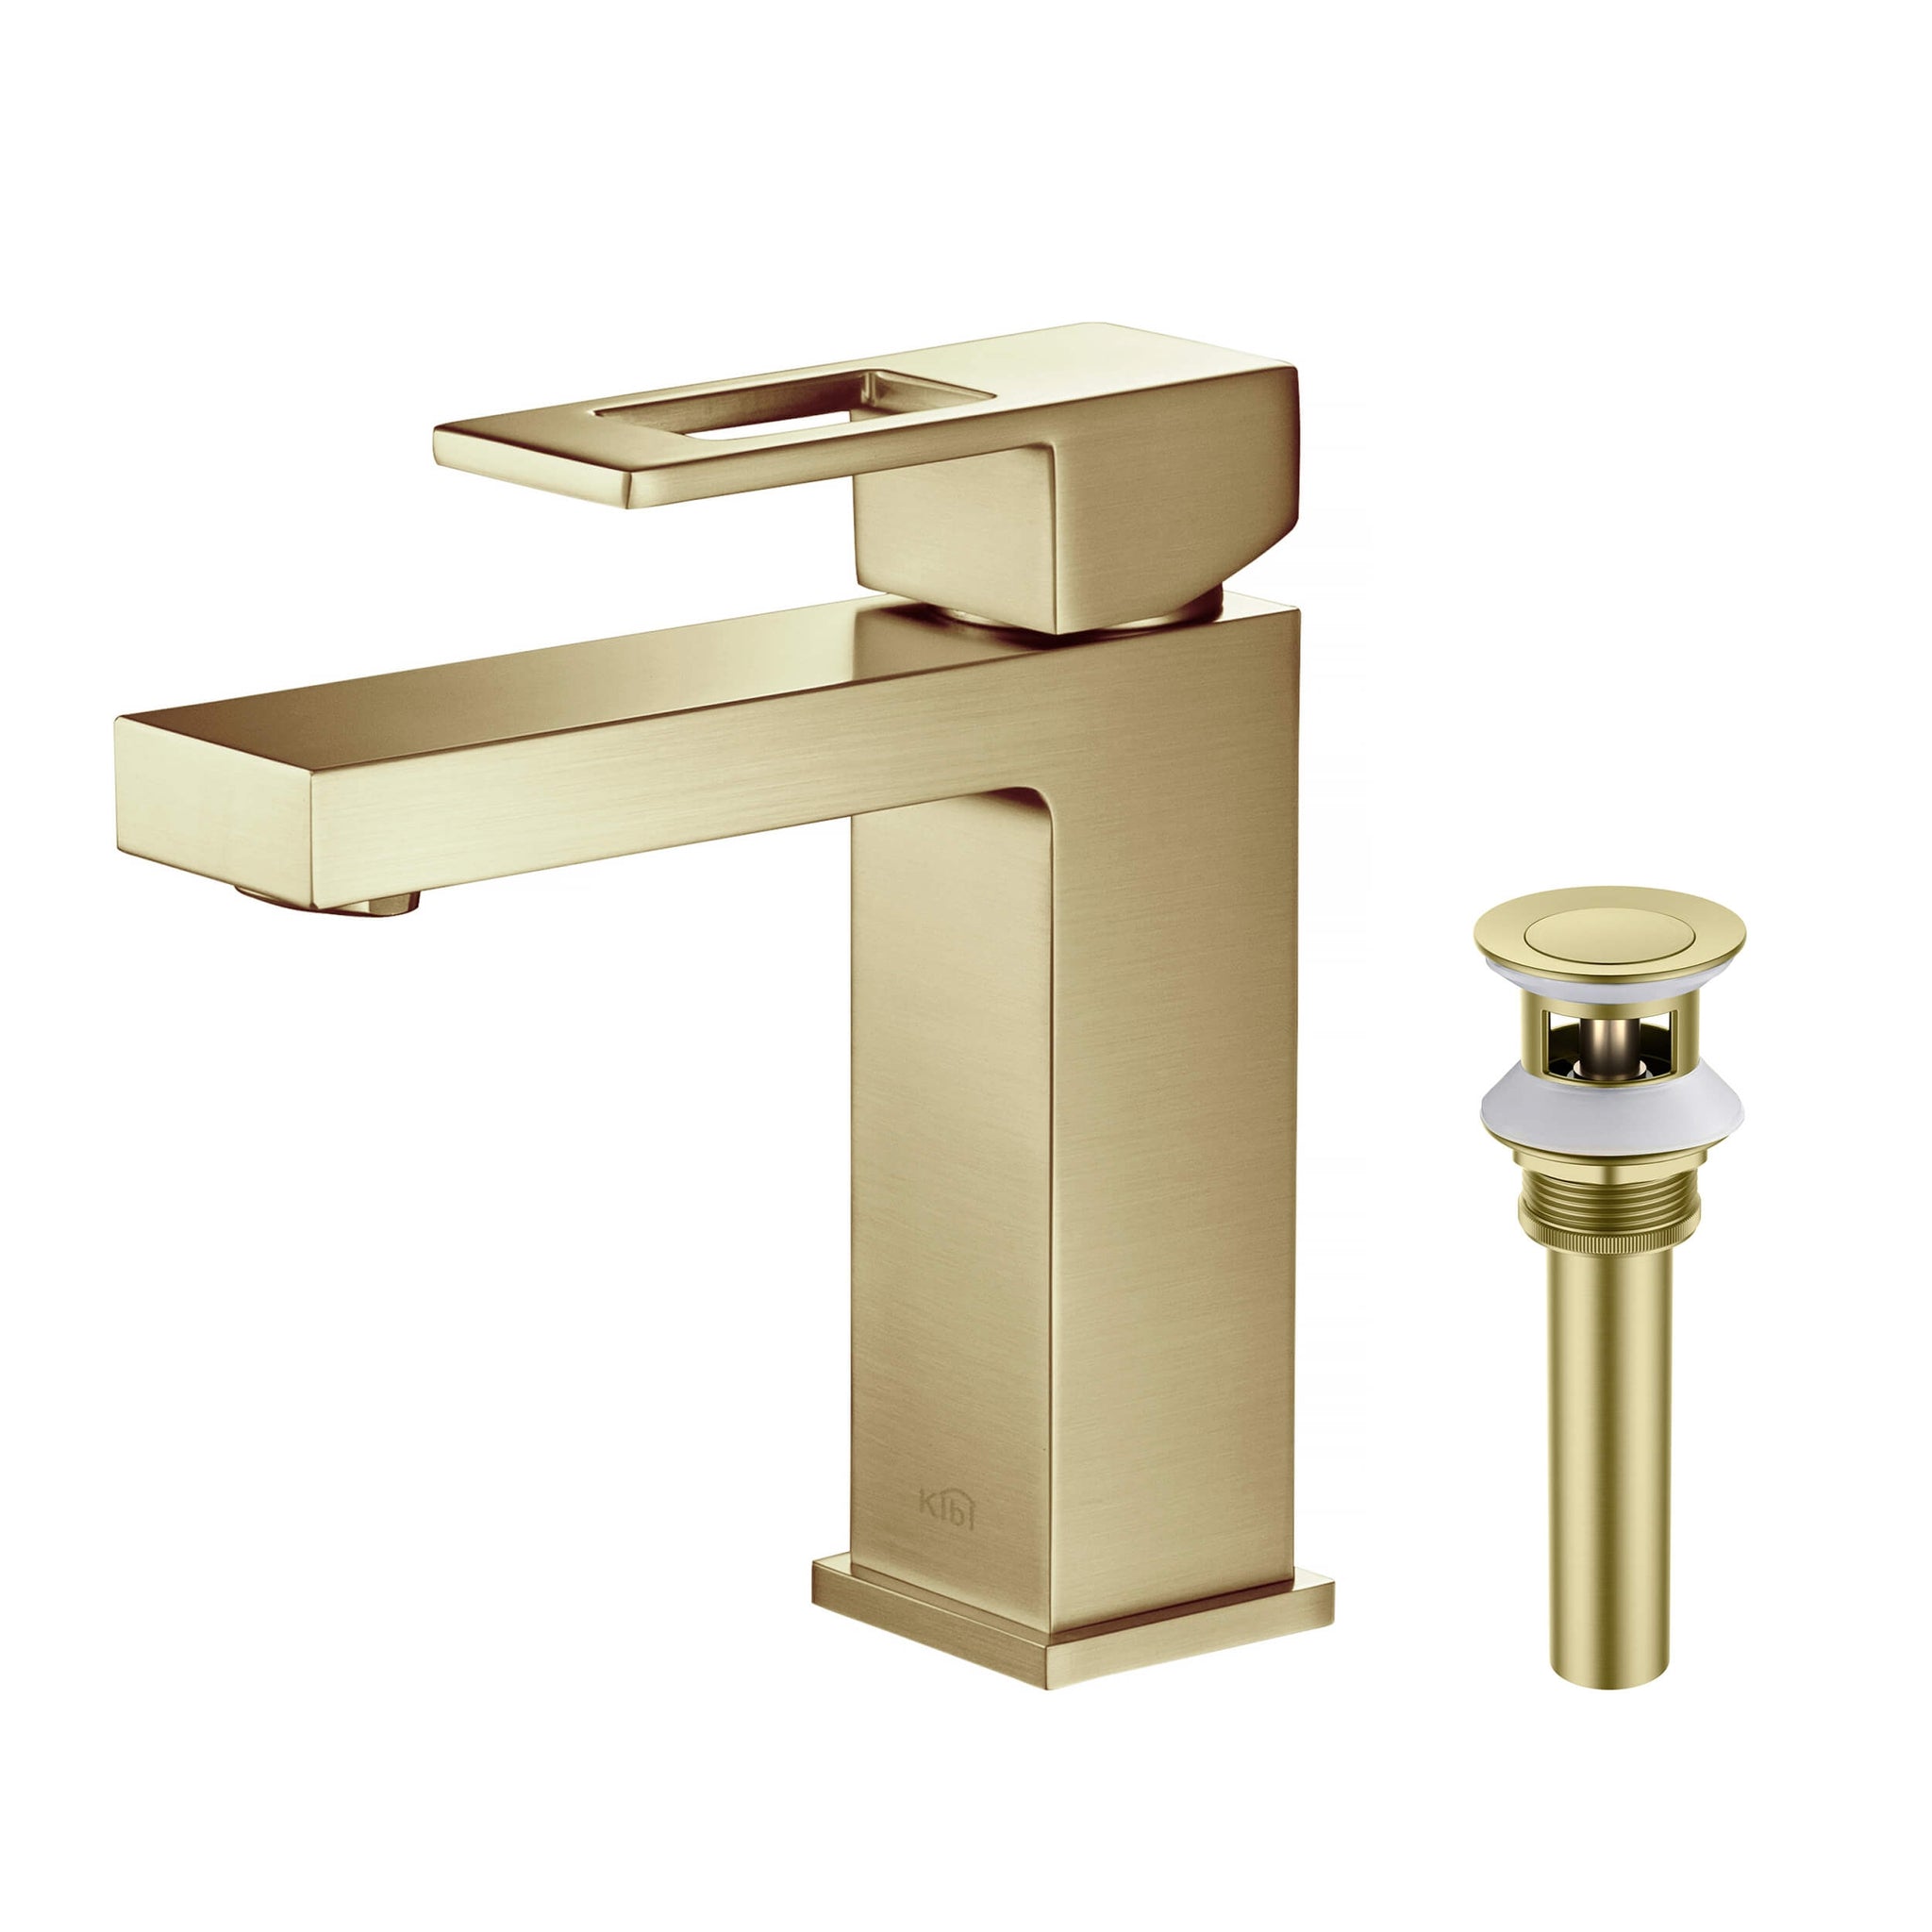 KIBI, KIBI Cubic Single Handle Brushed Gold Solid Brass Bathroom Vanity Sink Faucet With Pop-Up Drain Stopper Small Cover With Overflow